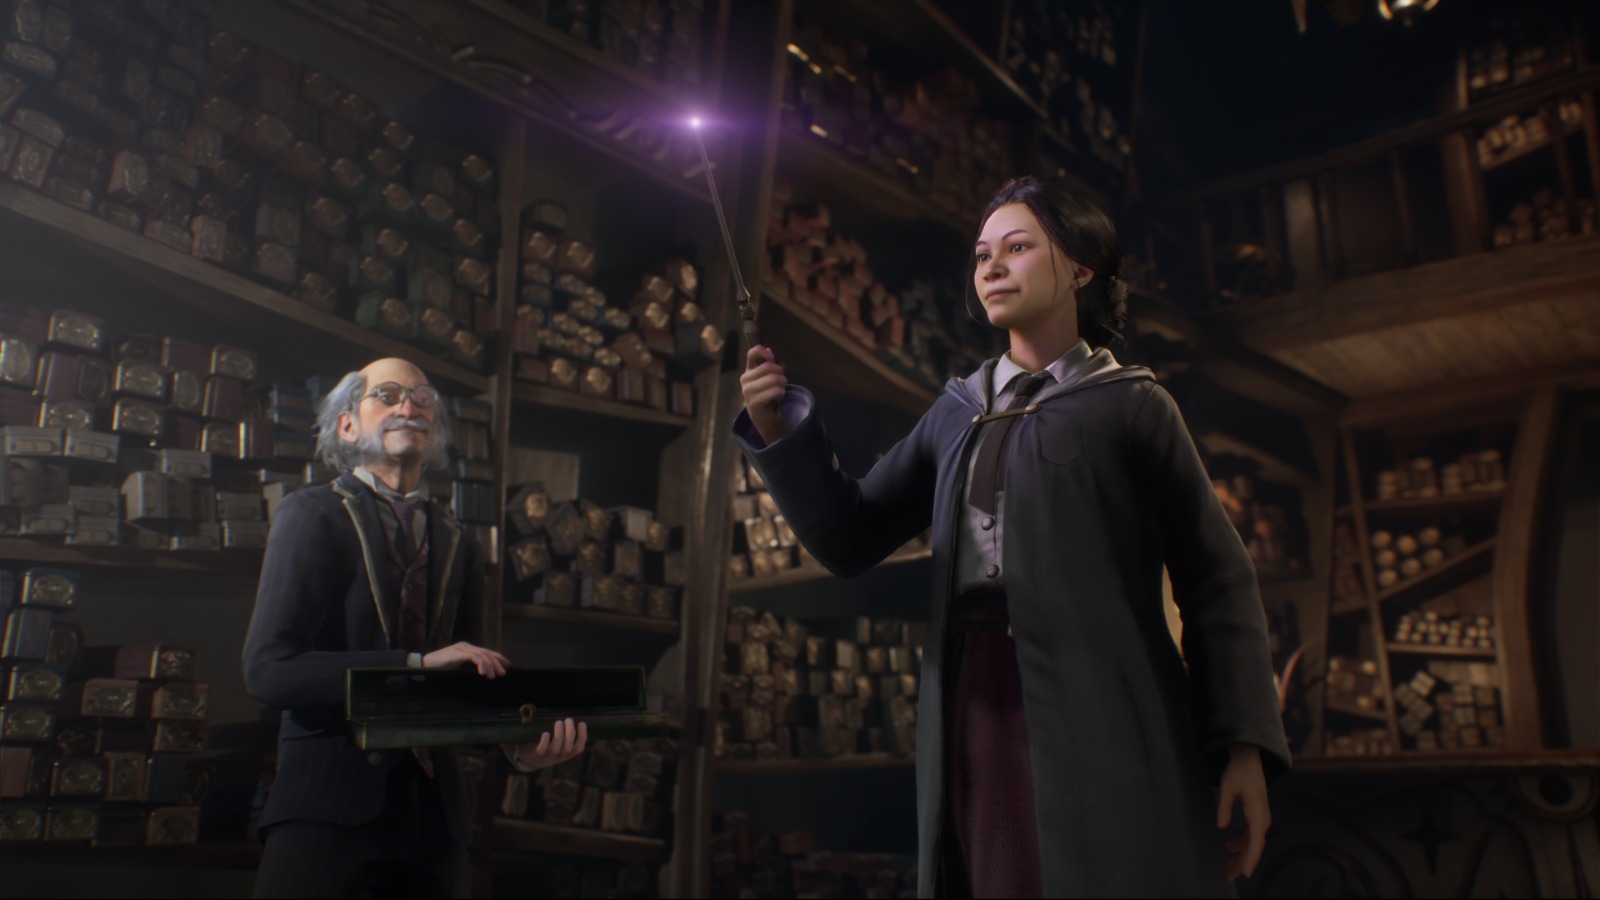 Questions you may have about Hogwarts Legacy so far – answered